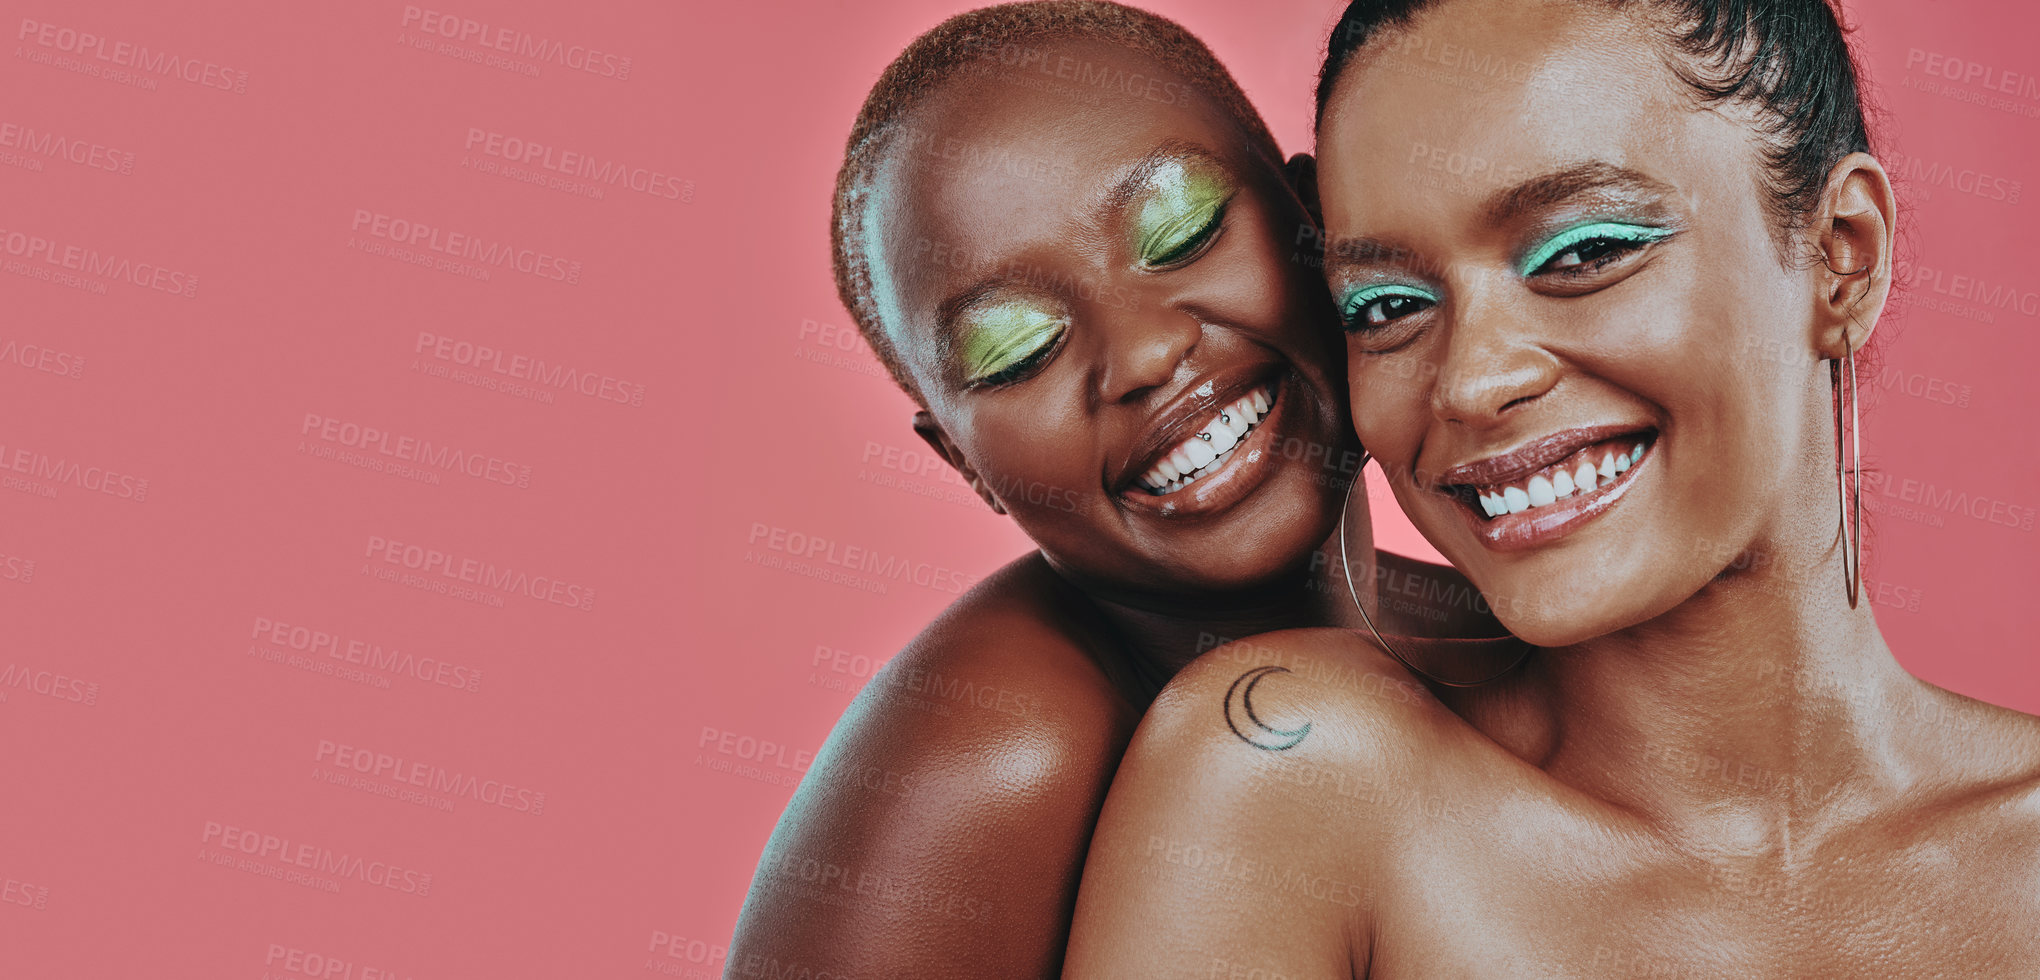 Buy stock photo Shot of two beautiful young women posing together against a pink background